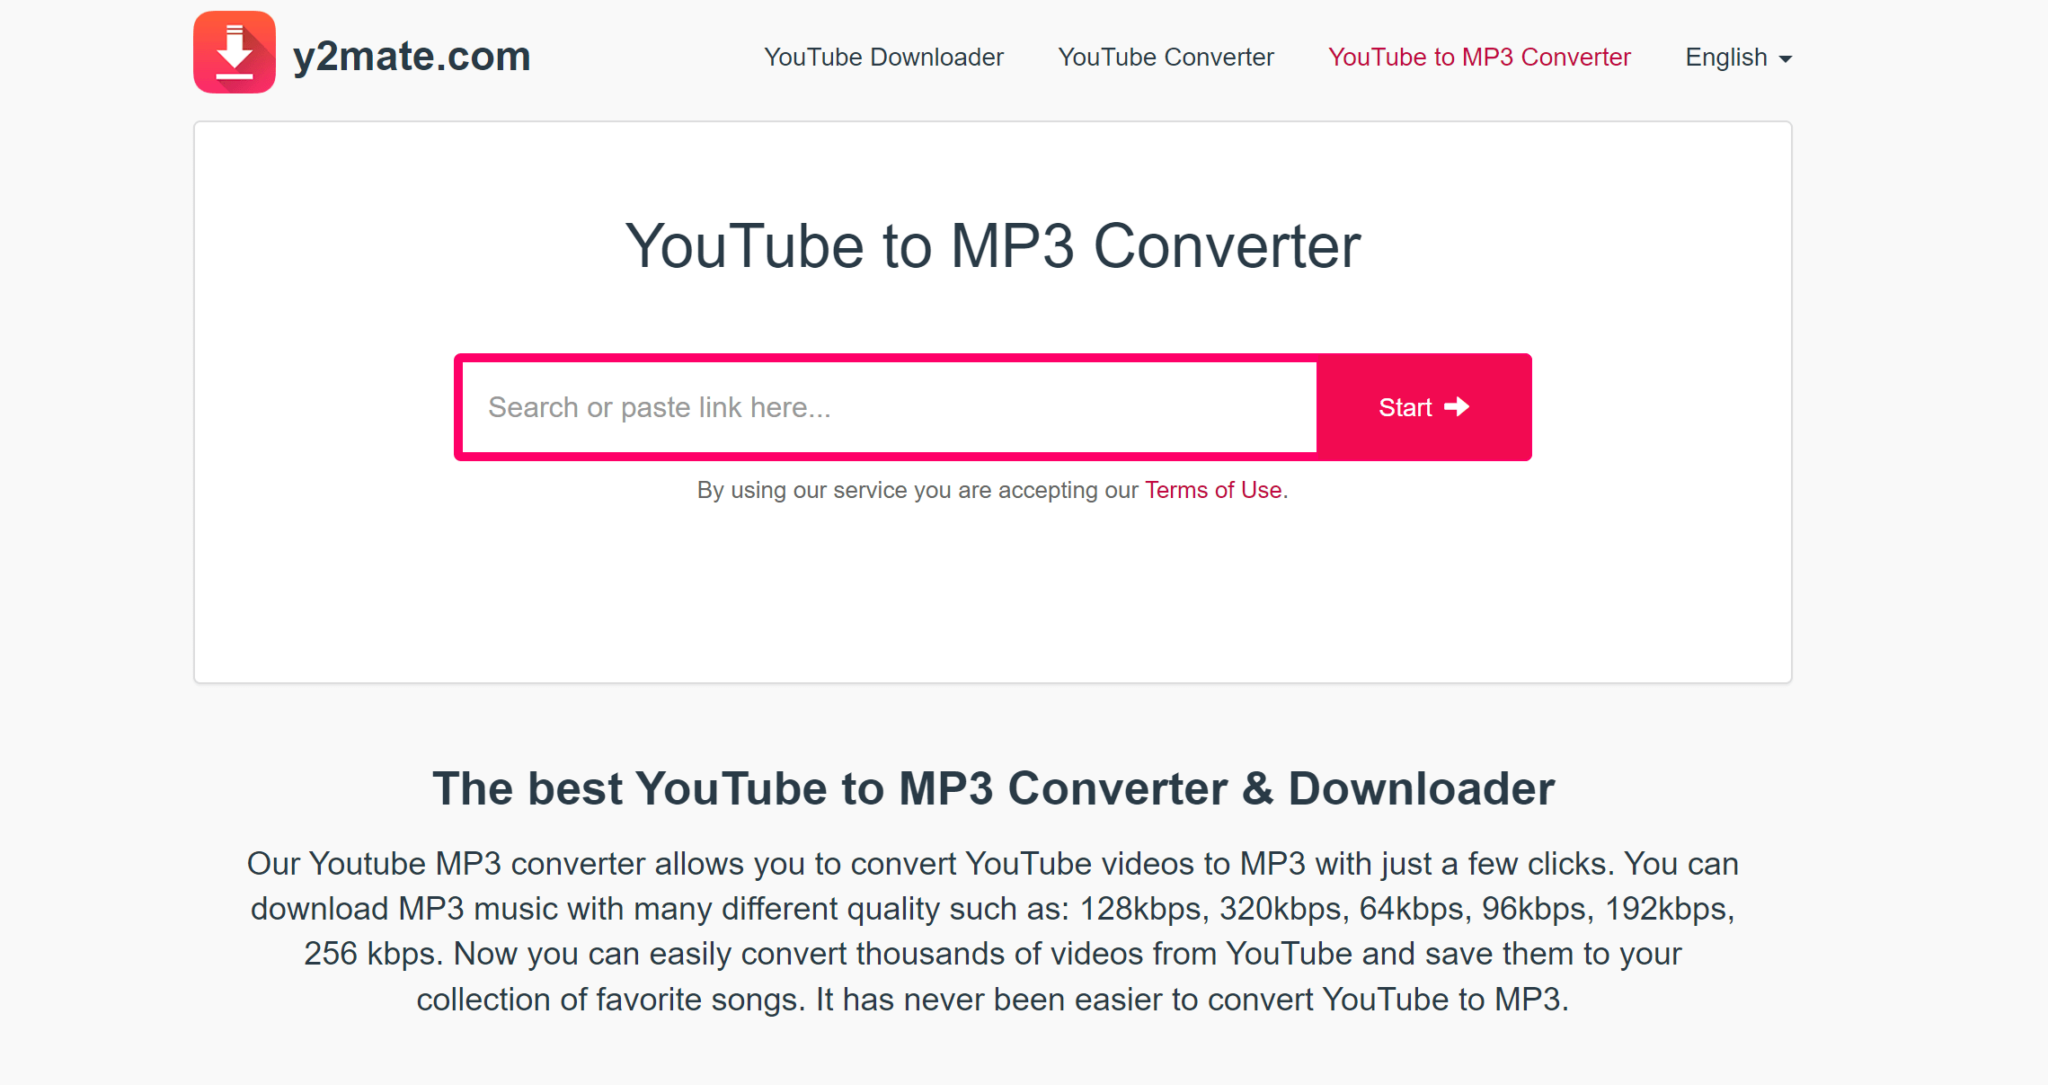 YouTube Download and Convert 3.0 for Windows PC